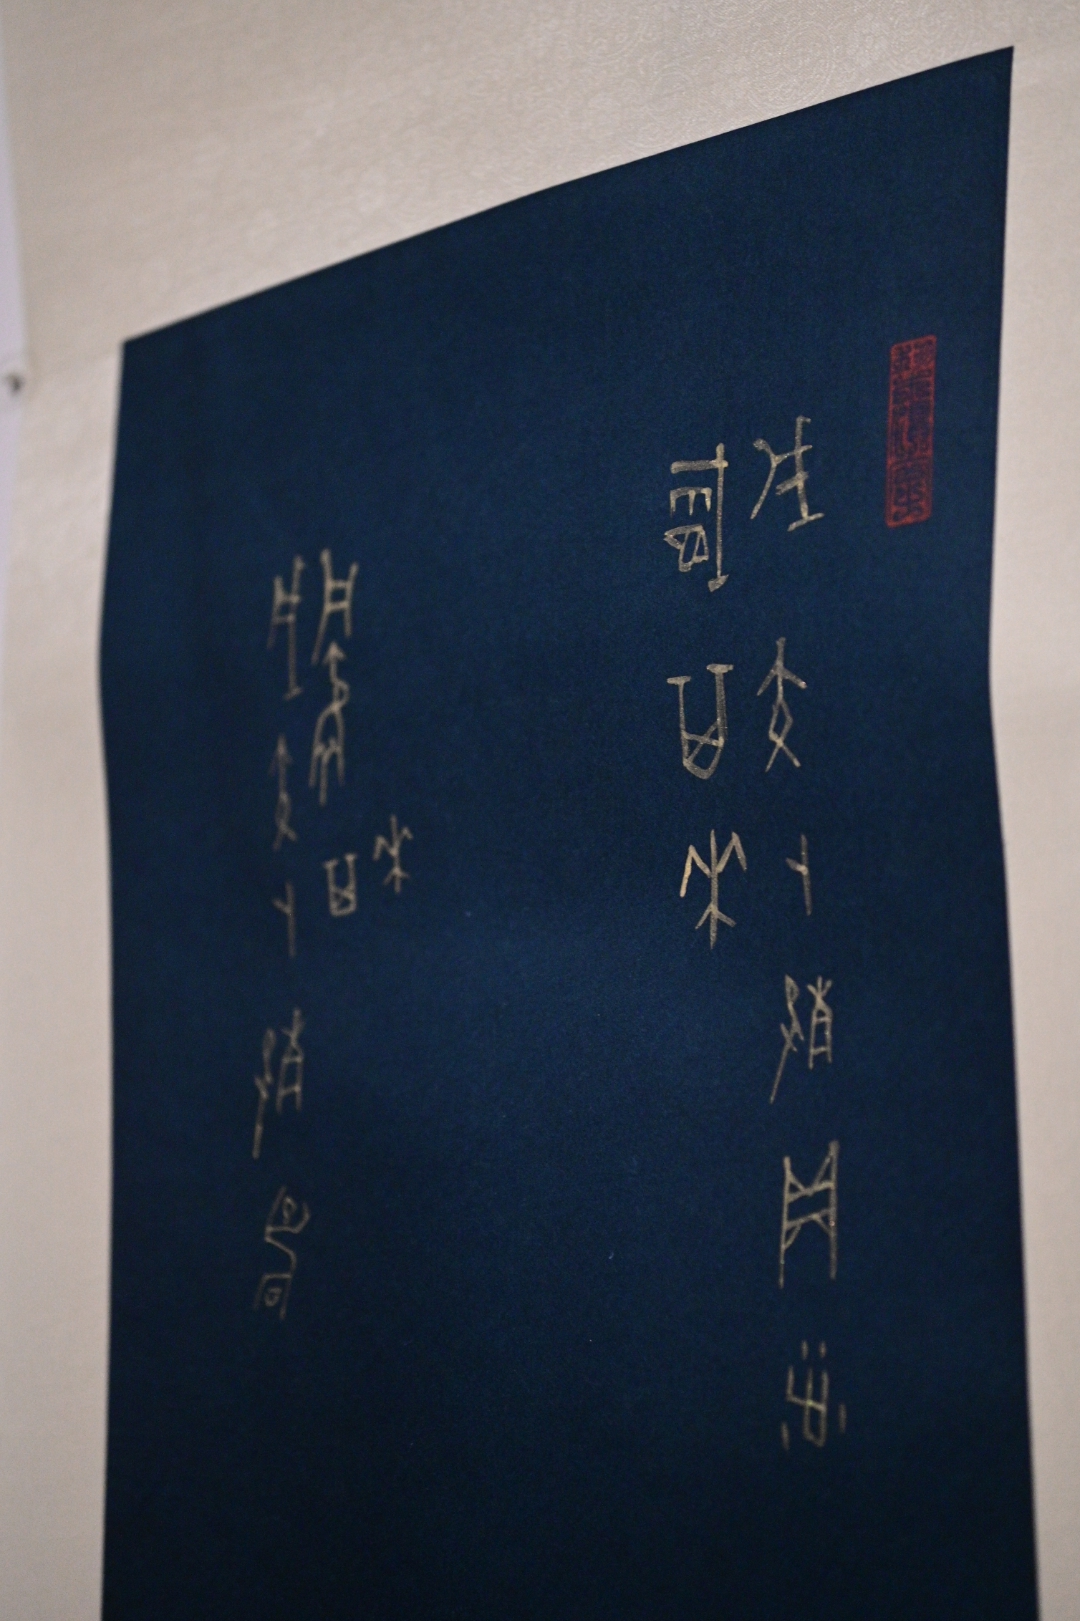 The "City Rhymes: The Melodious Notes of Calligraphy" exhibition will be held from tomorrow (July 22) at the Hong Kong Museum of Art. Photo shows Jao Tsung-i's "Gold calligraphy in oracle bone script" (partial).